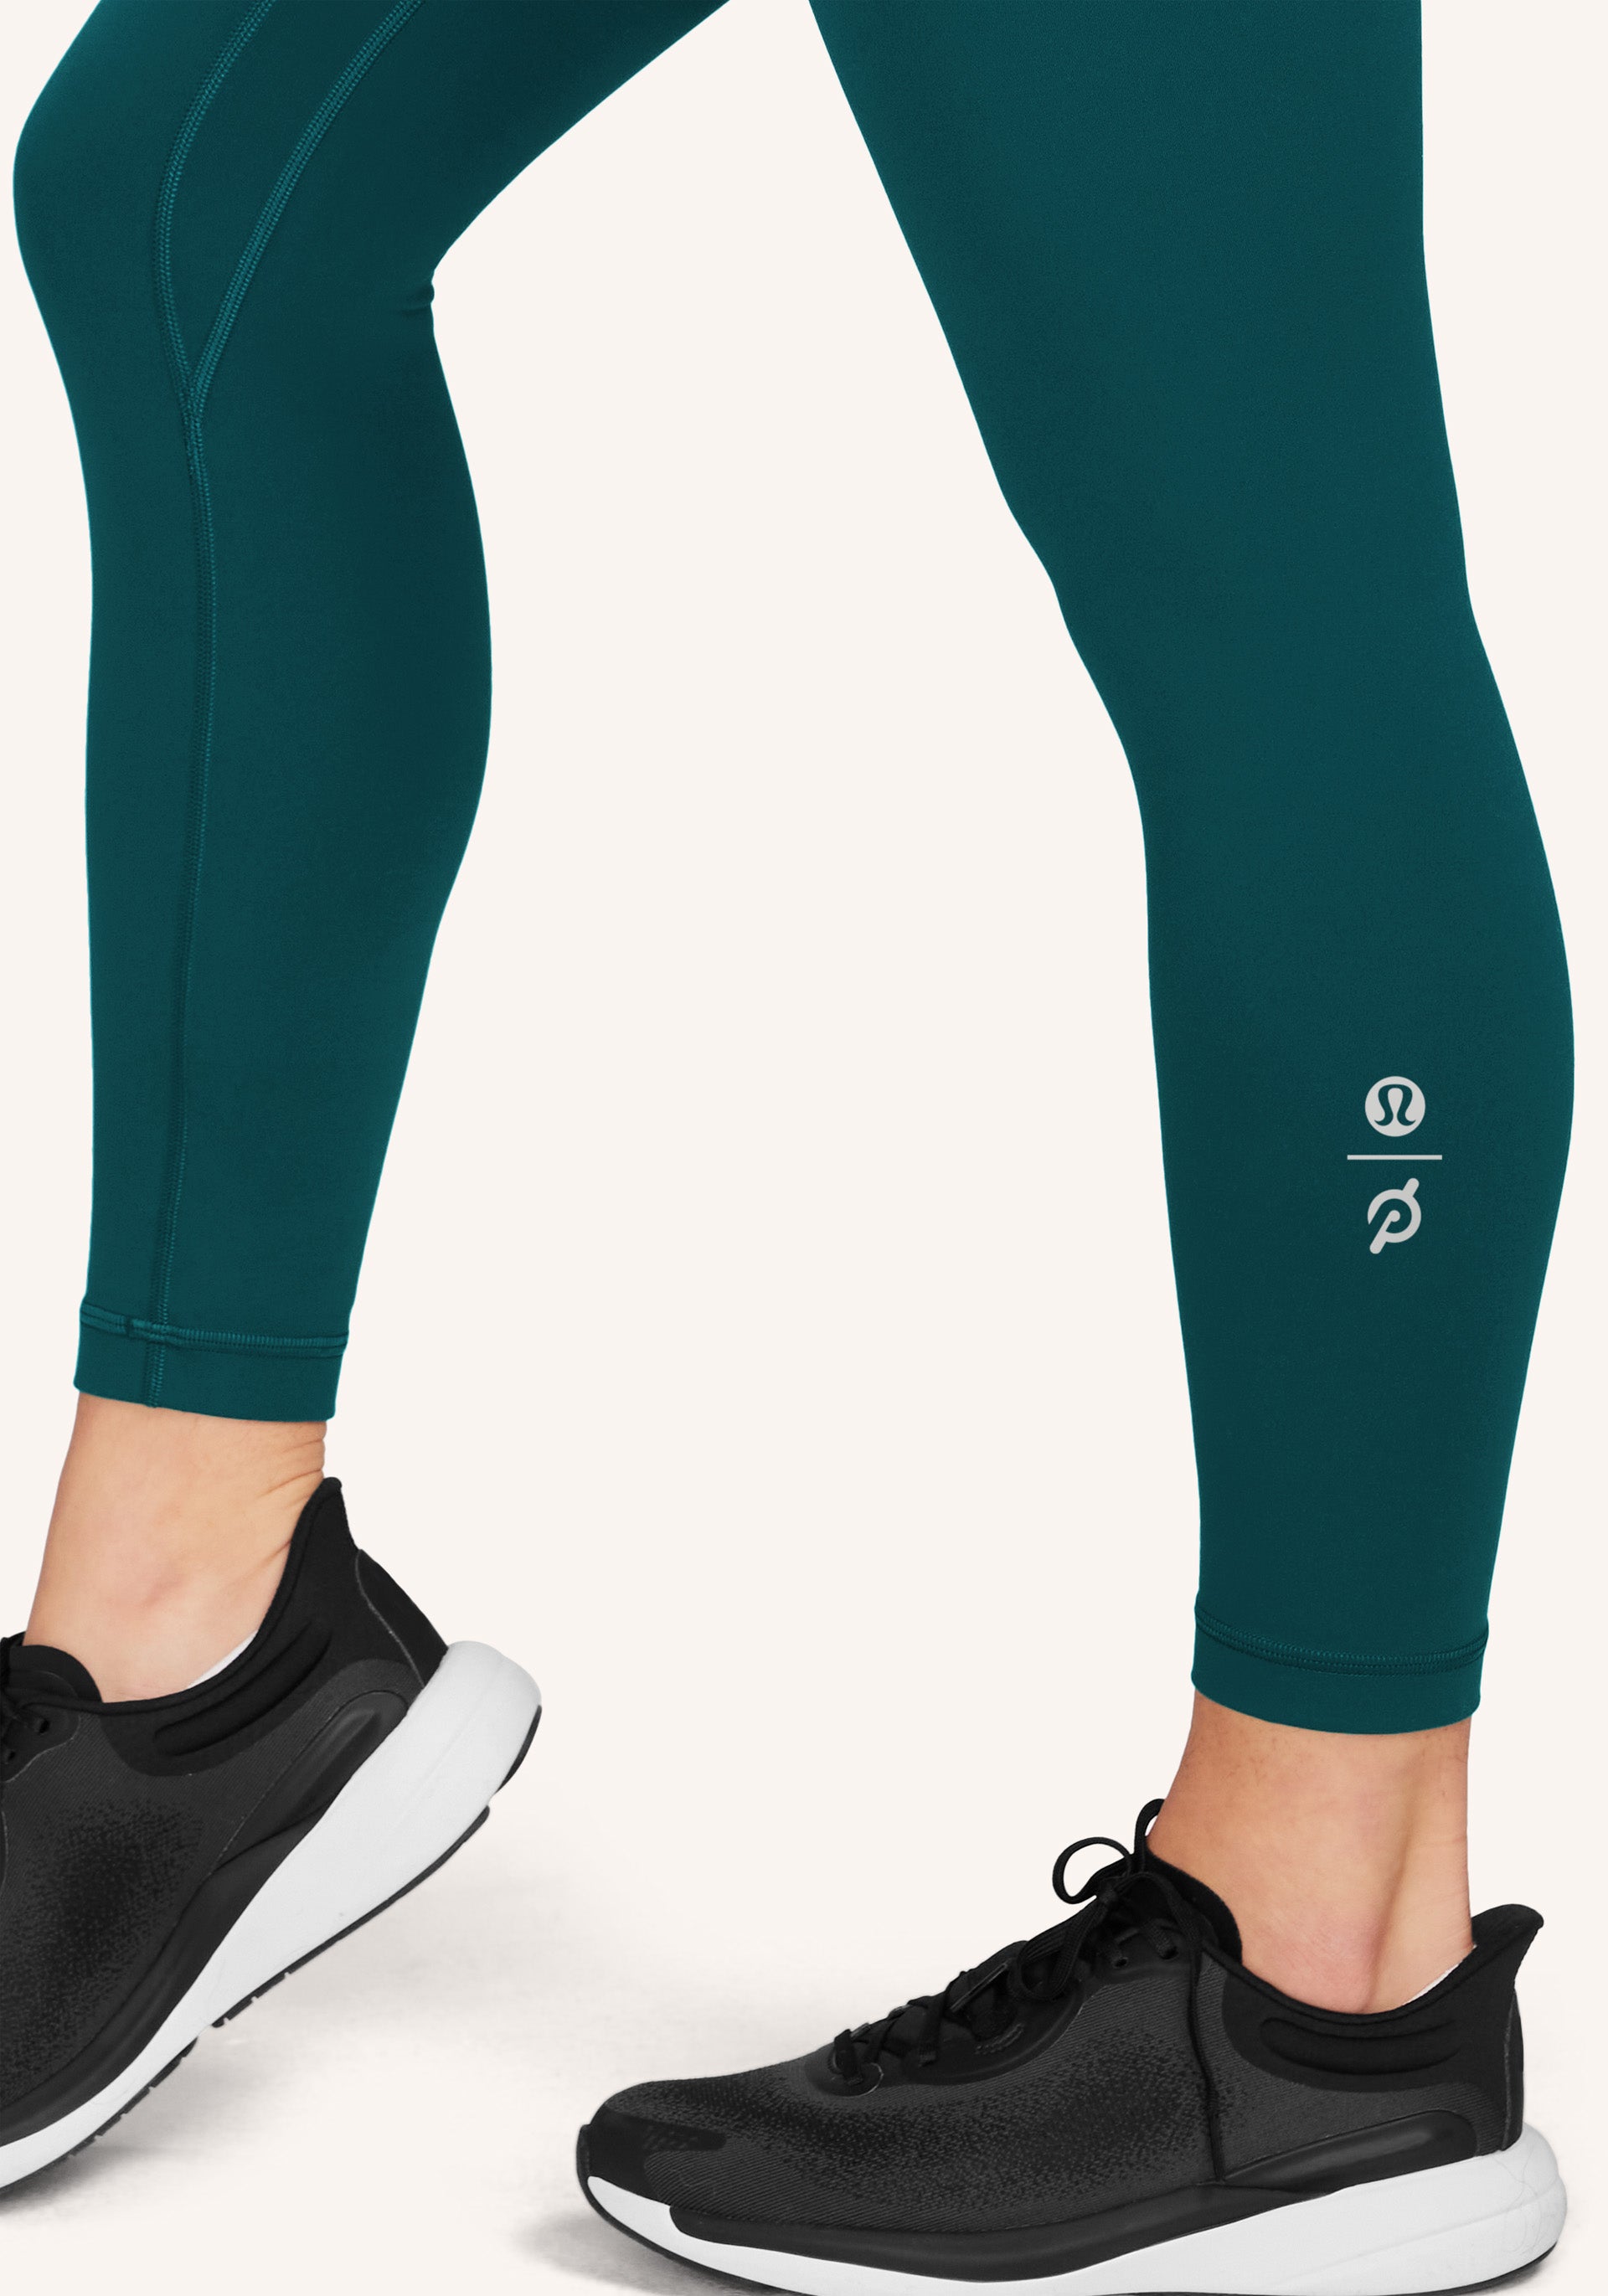 Track lululemon Align™ High-Rise Pant with Pockets 25 - Storm Teal 